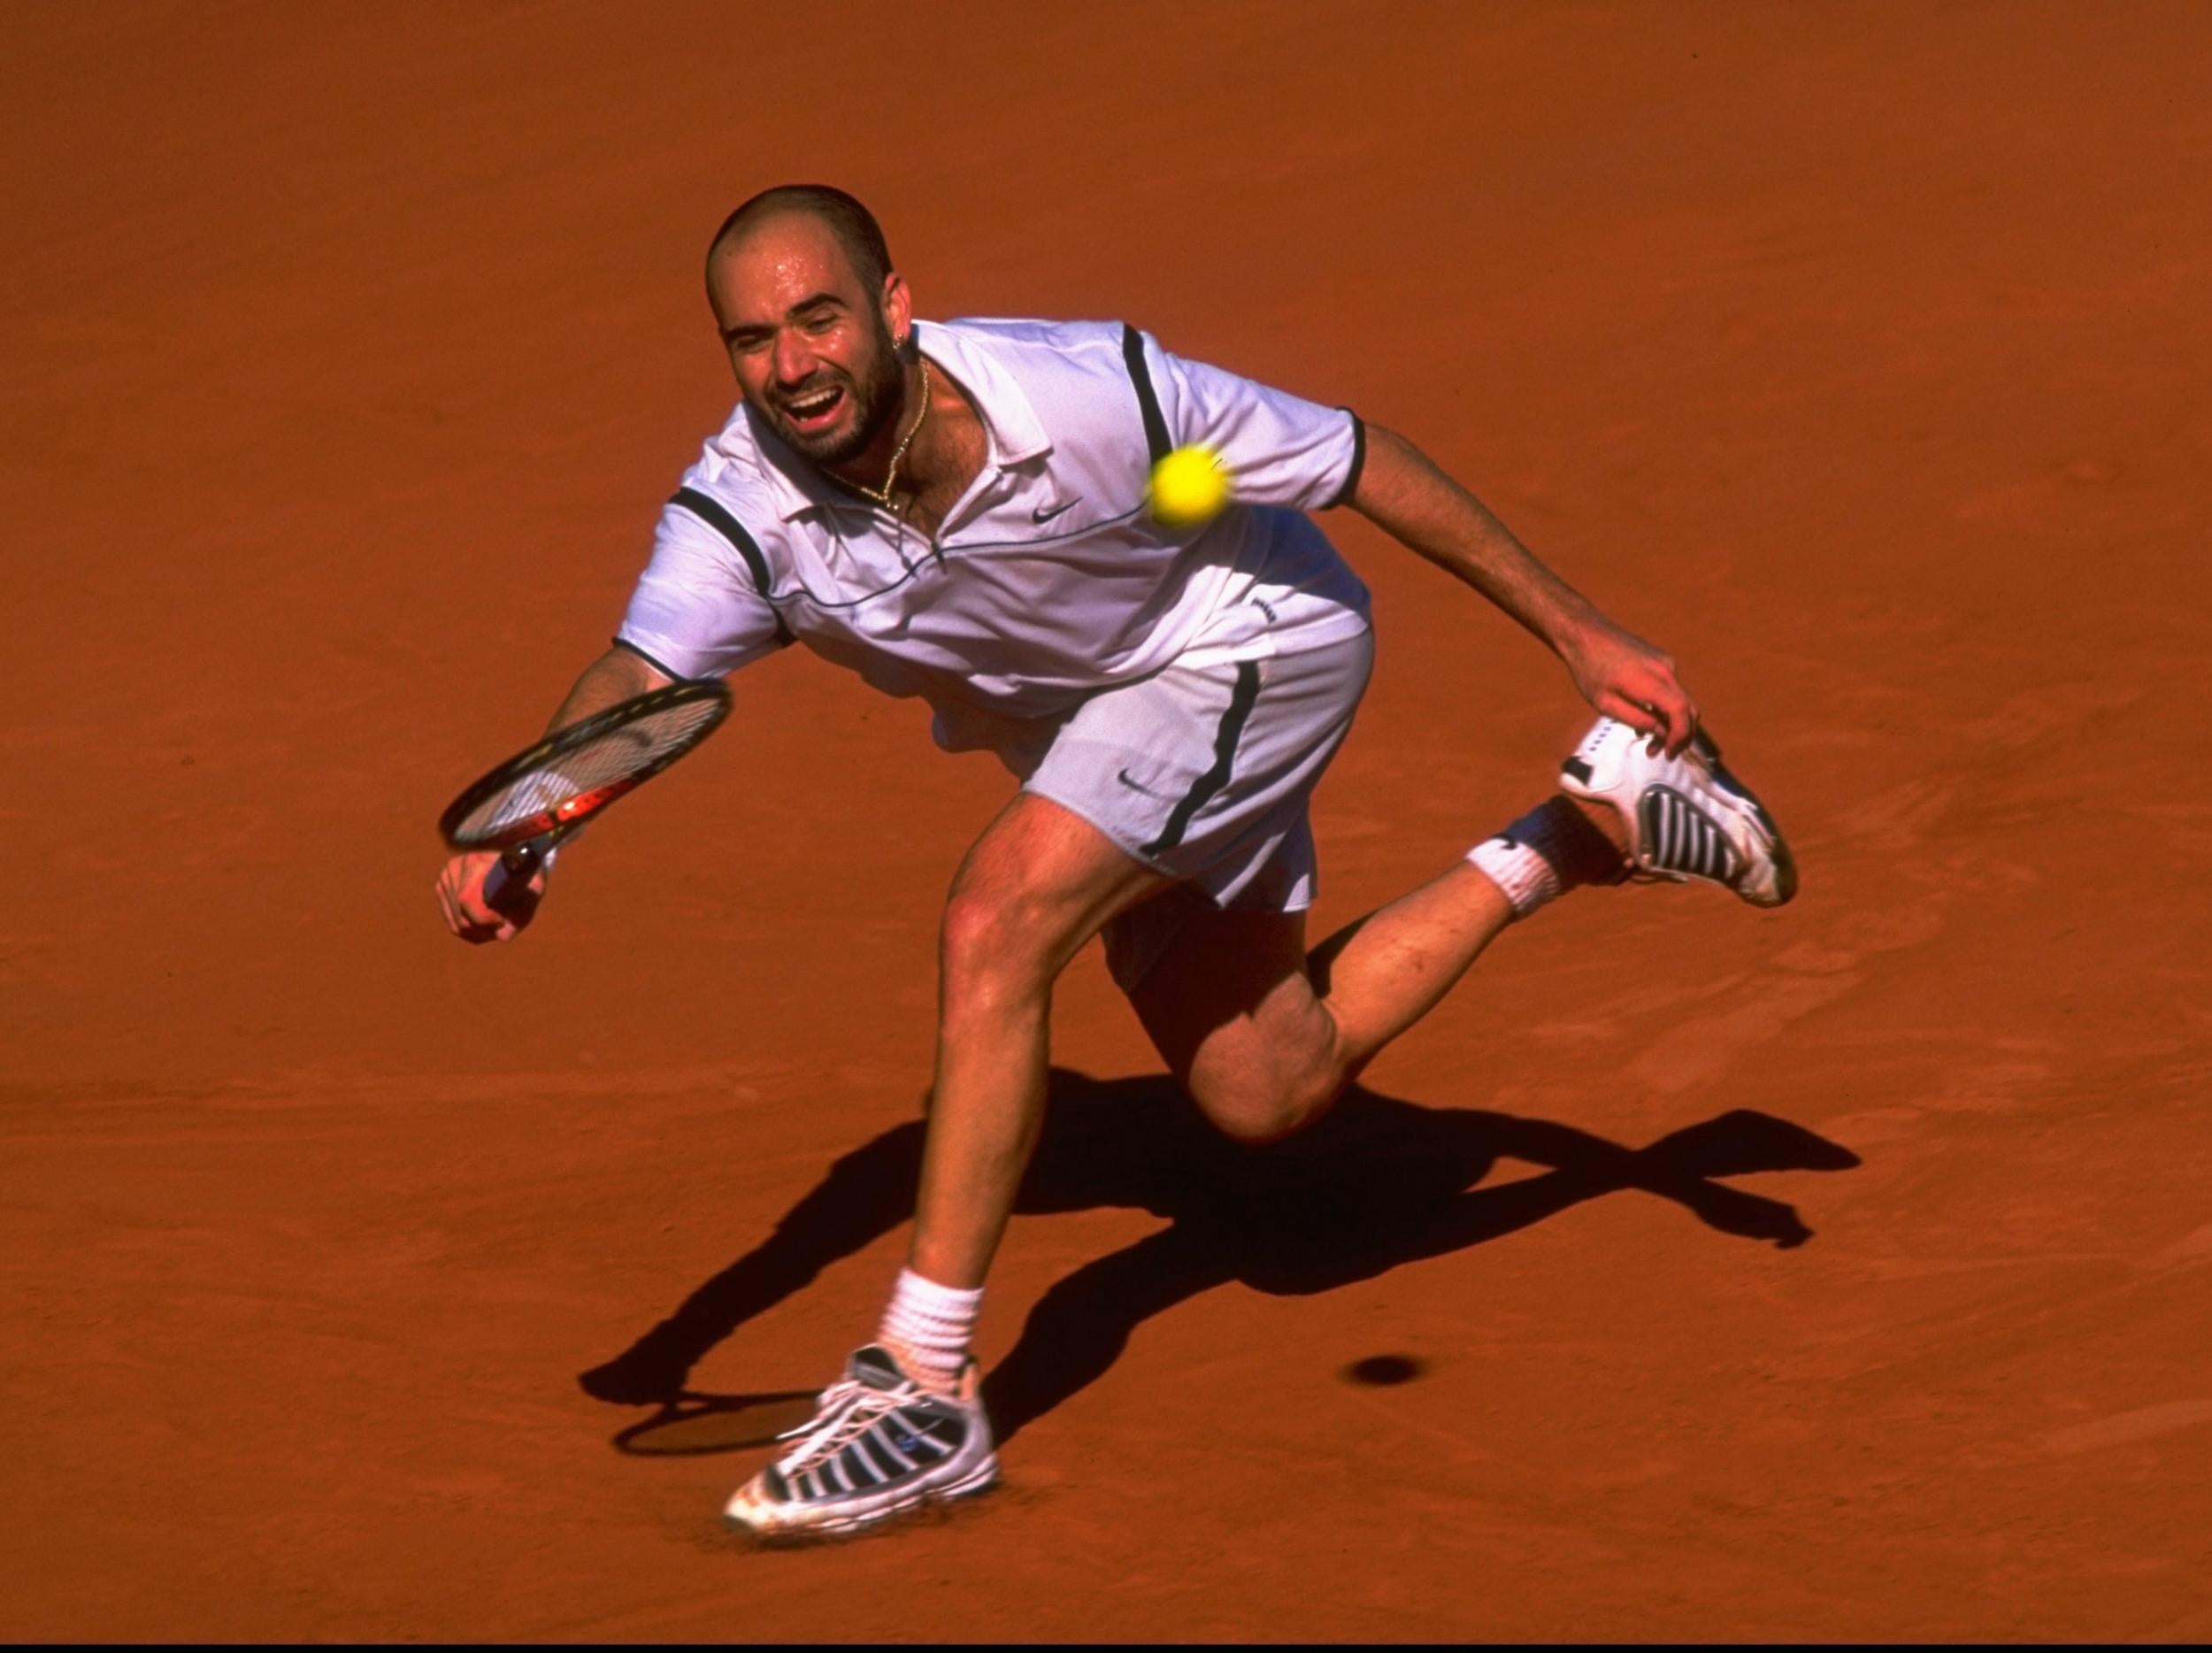 Agassi completed a career Slam at the French Open, in 1999